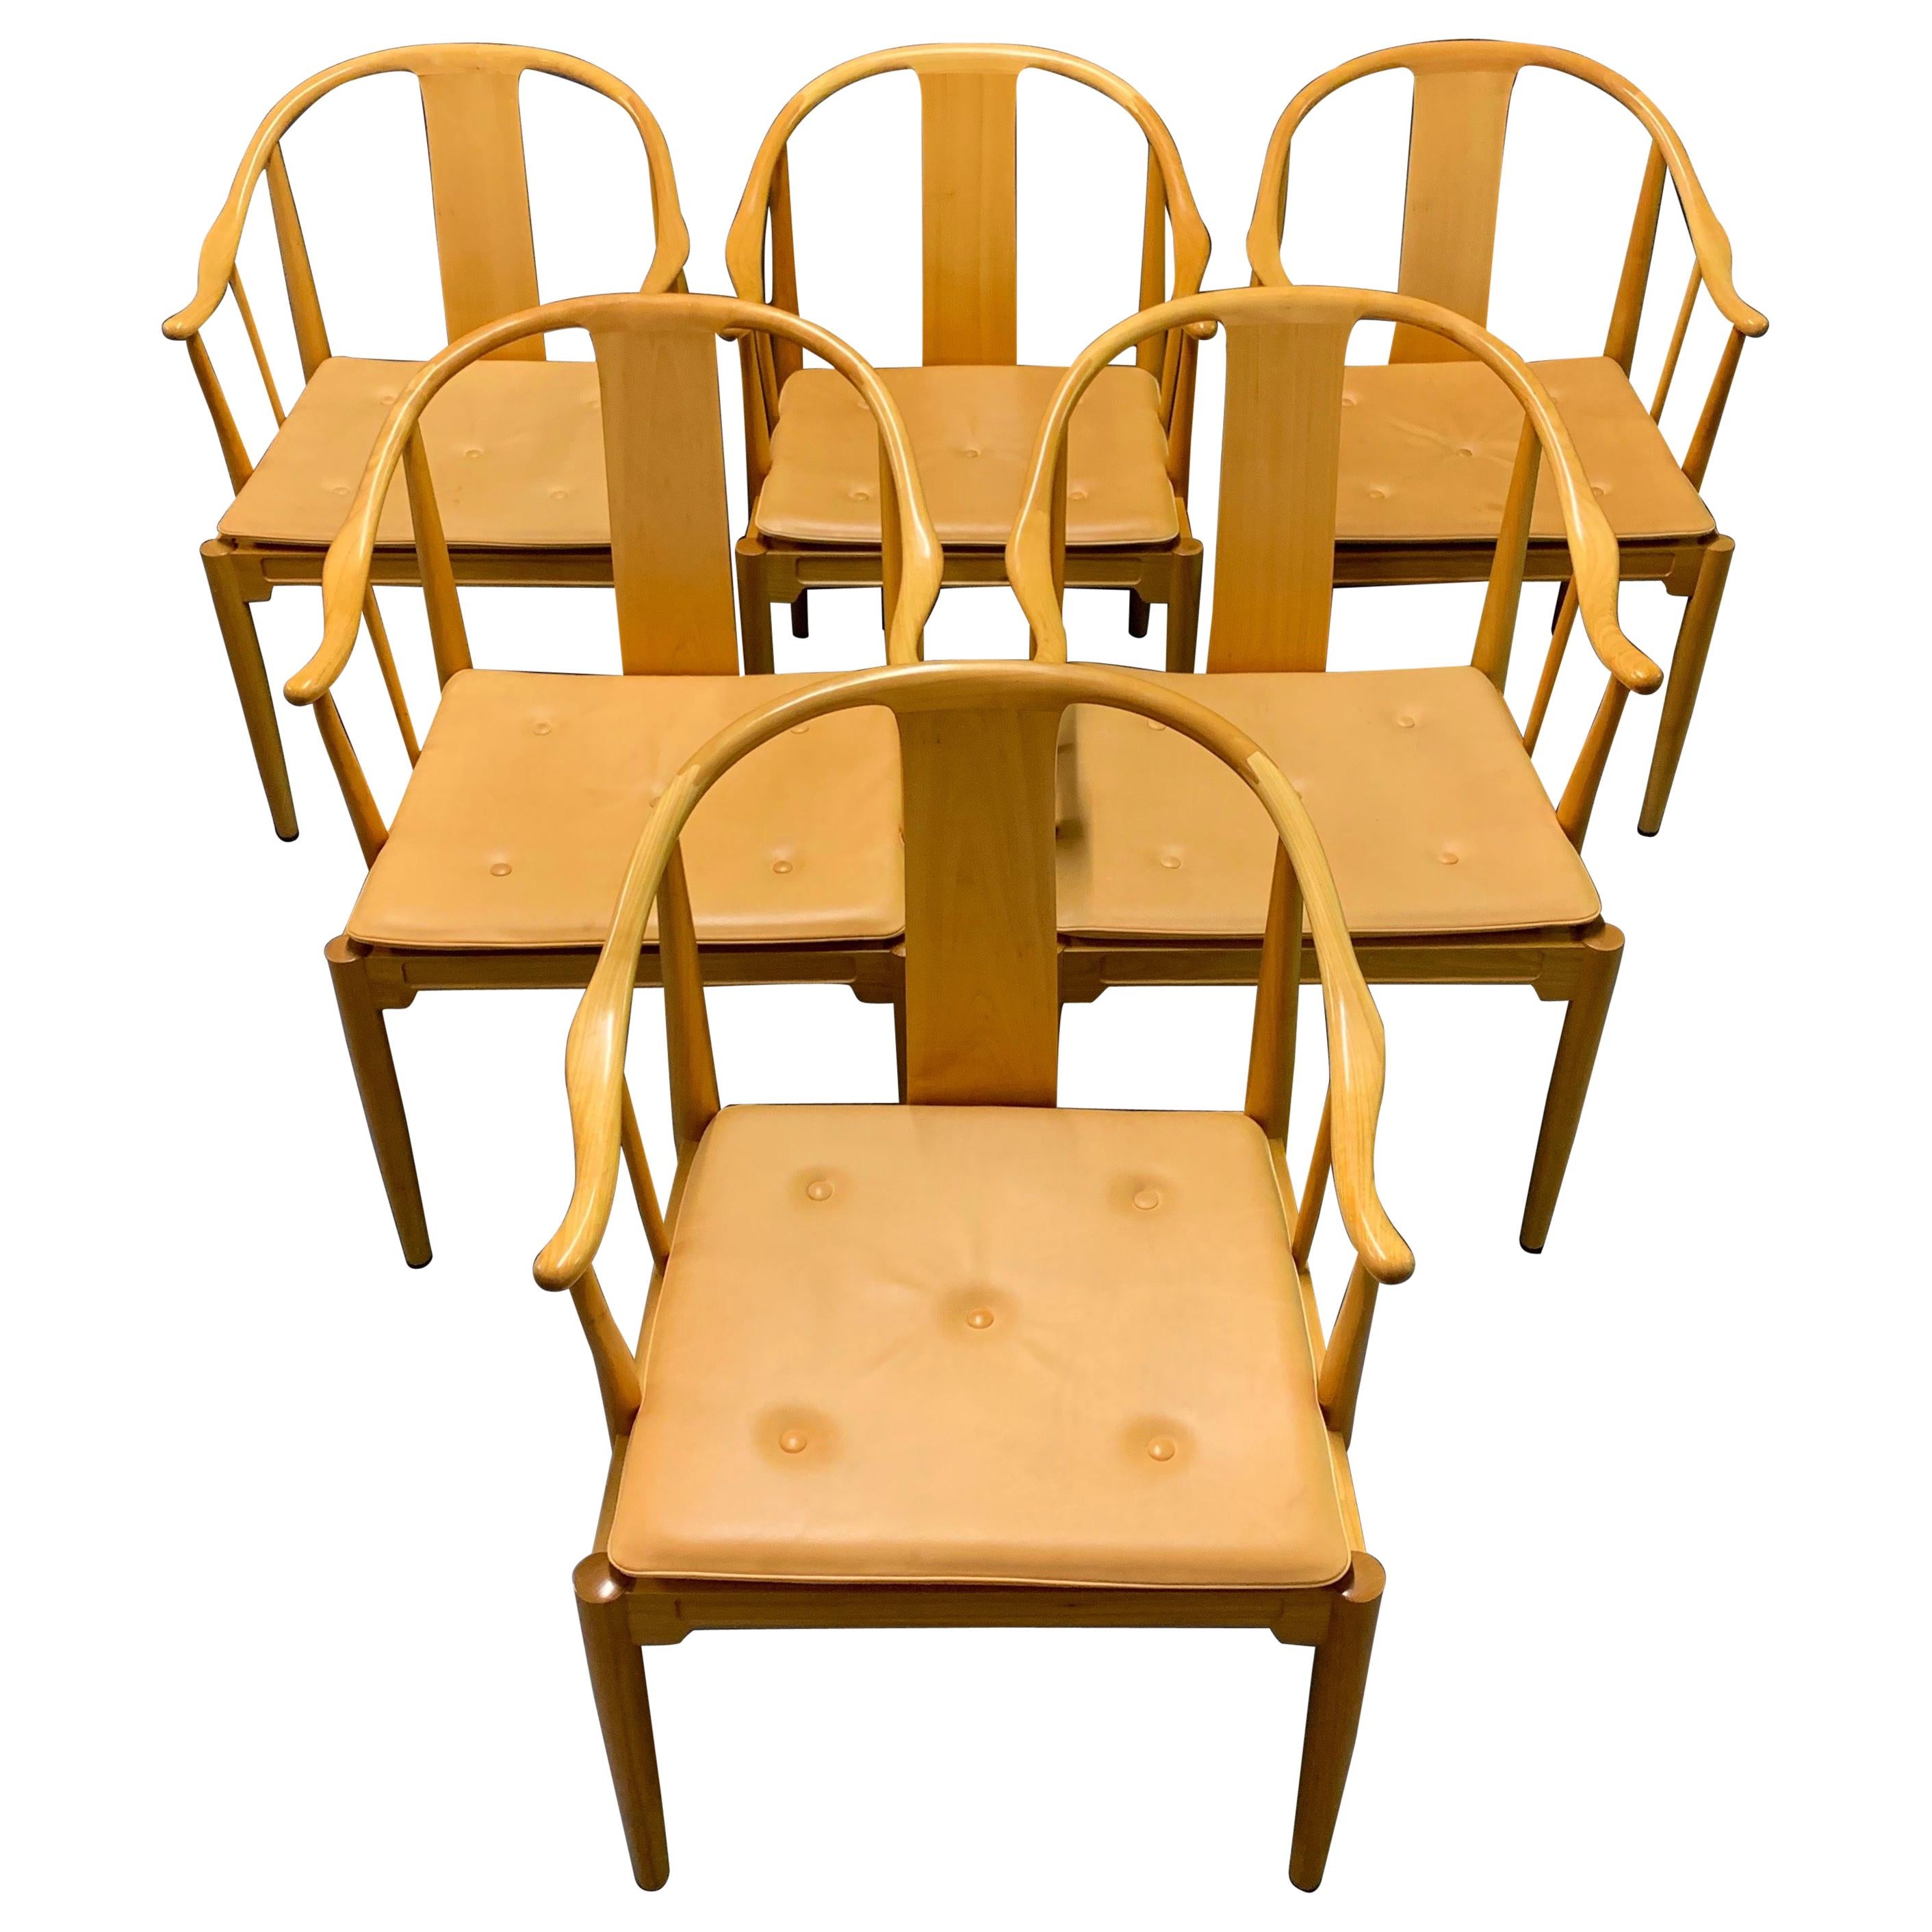 Rare Matching Set of 6 Chinese Dining Chairs by Hans Wegner